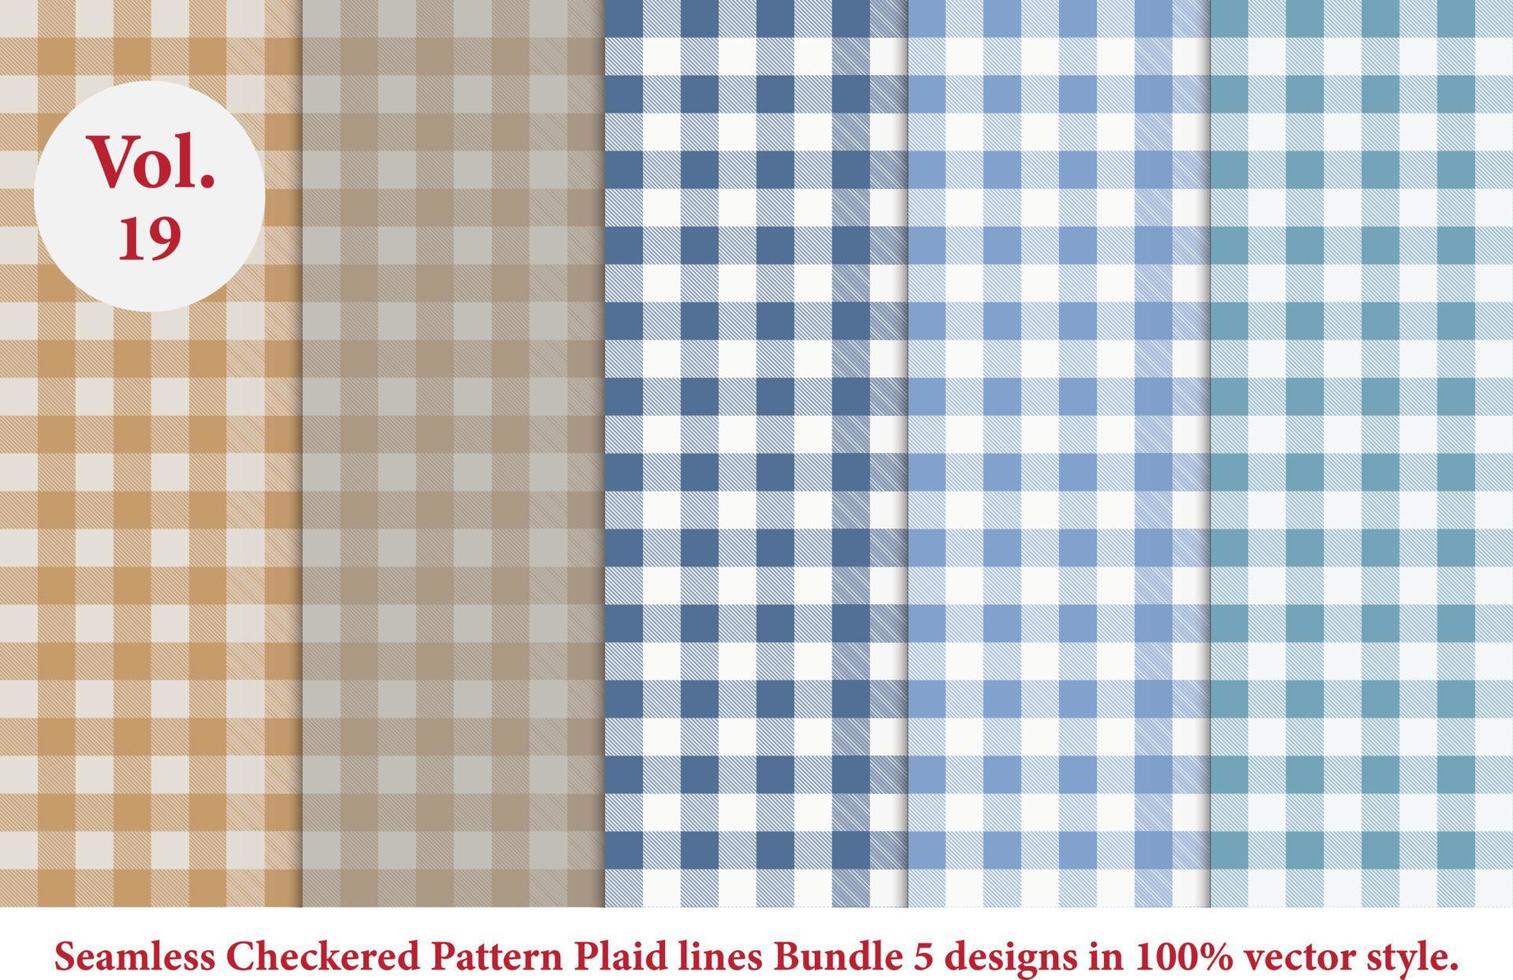 Plaid lines Pattern,checkered Pattern,Argyle vector,Tartan Pattern in retro style vector